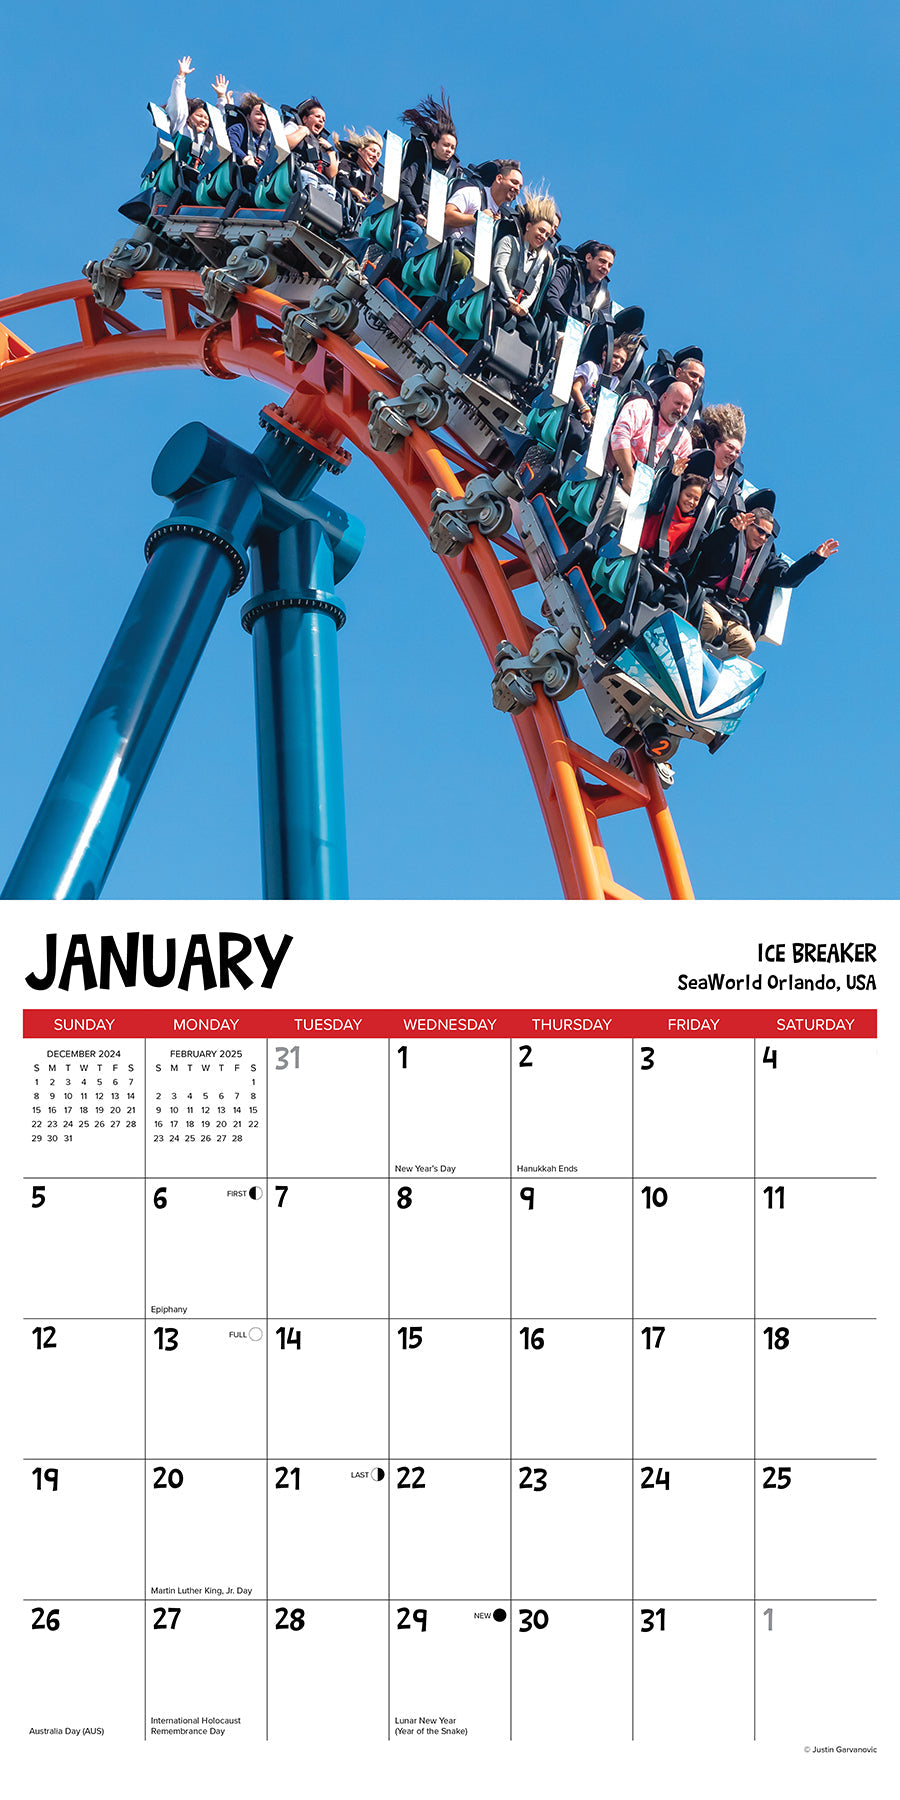 2025 Roller Coasters - Square Wall Calendar